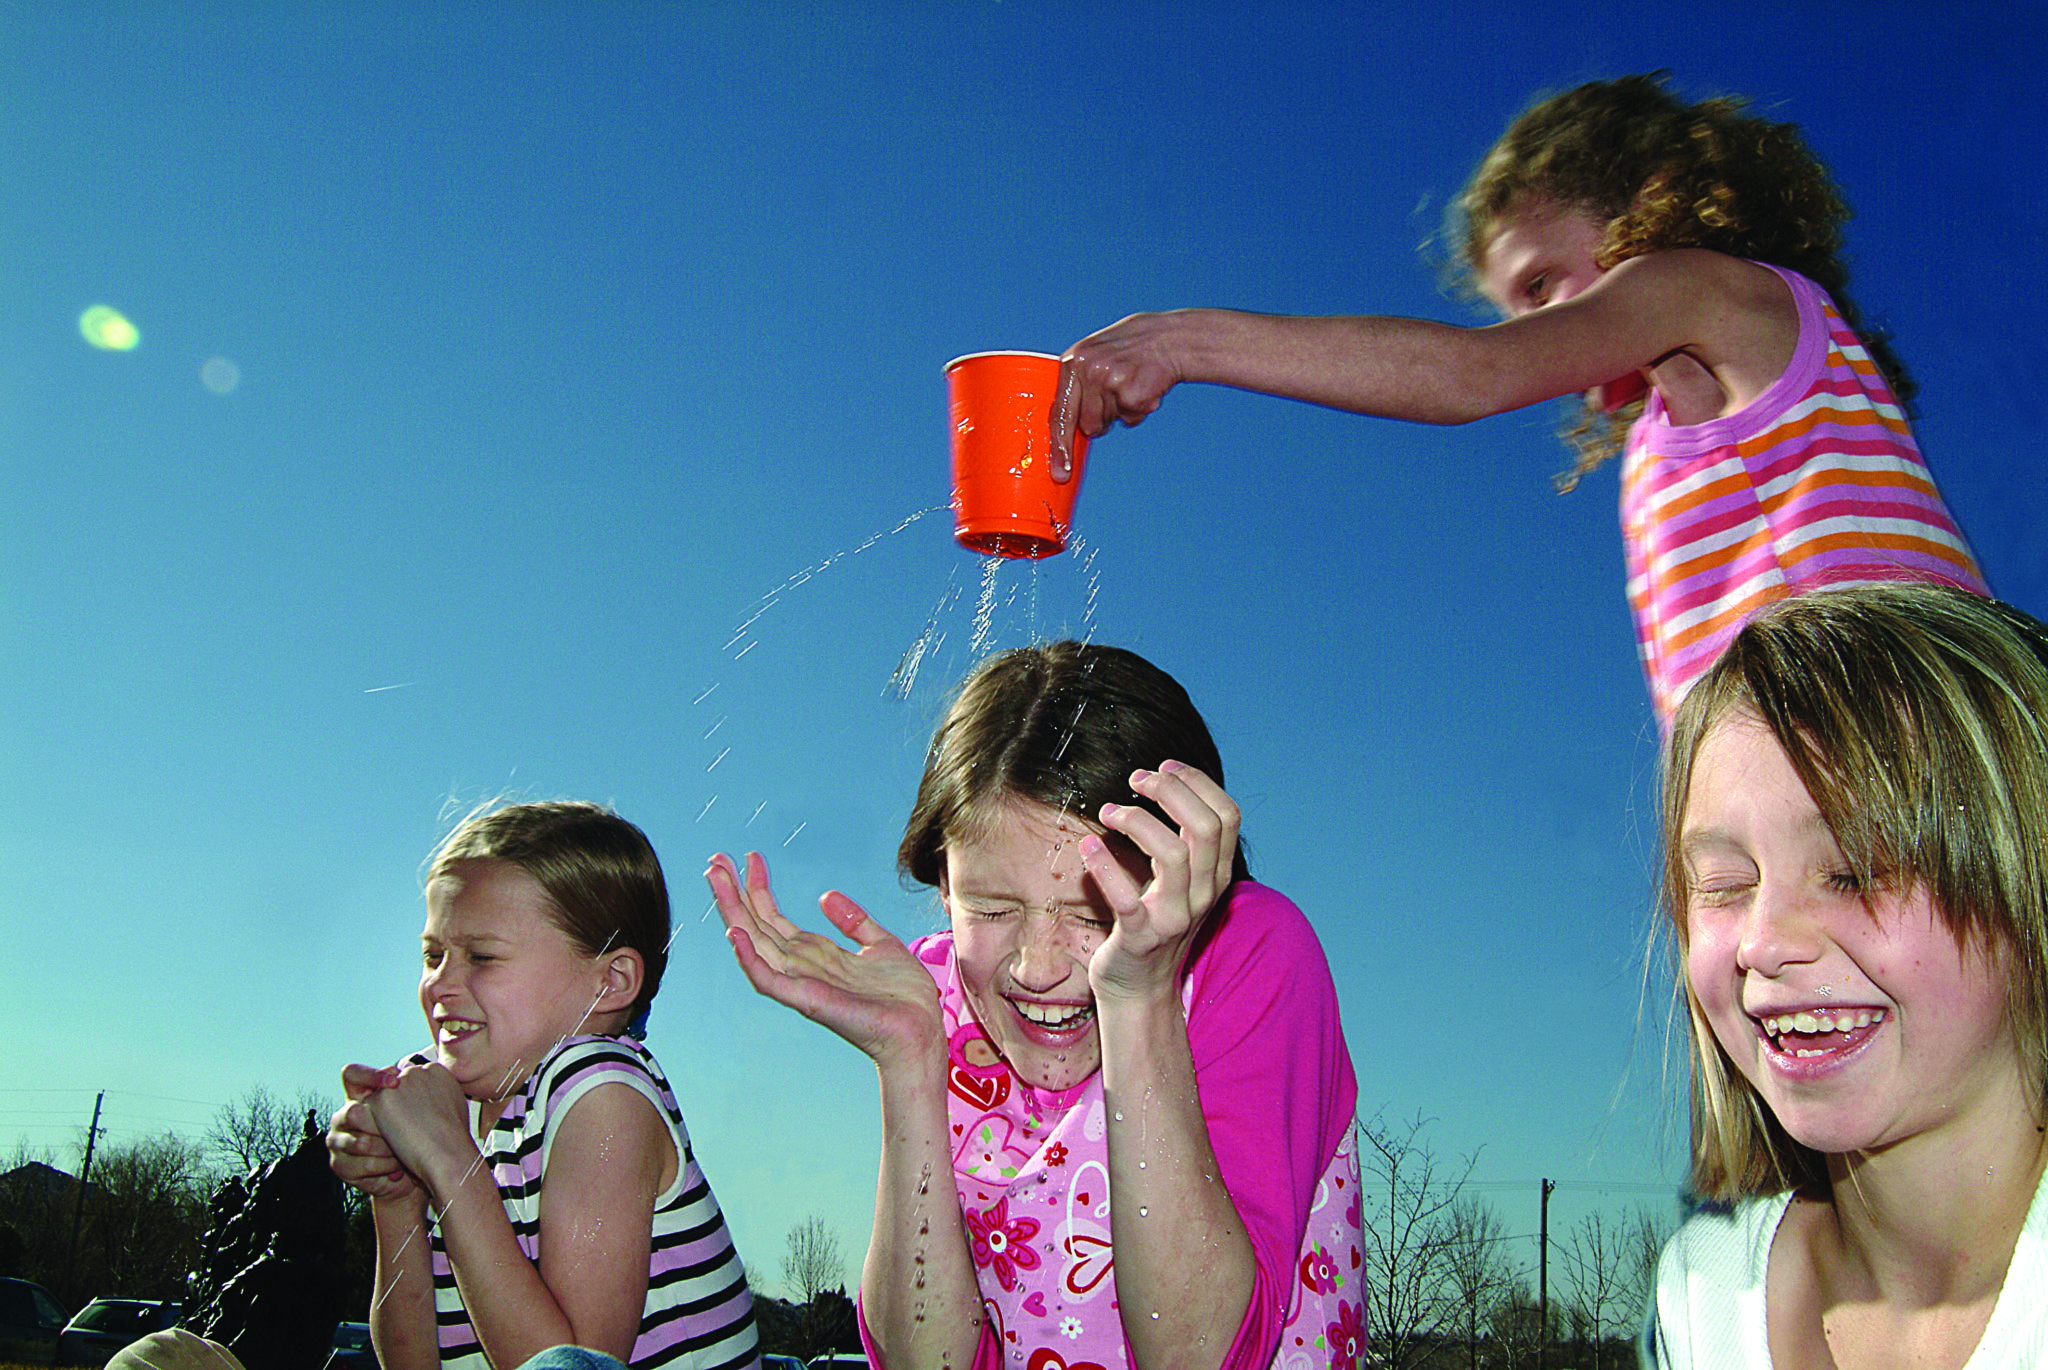 A child with a leaky cup walks around sprinkling friends with water.